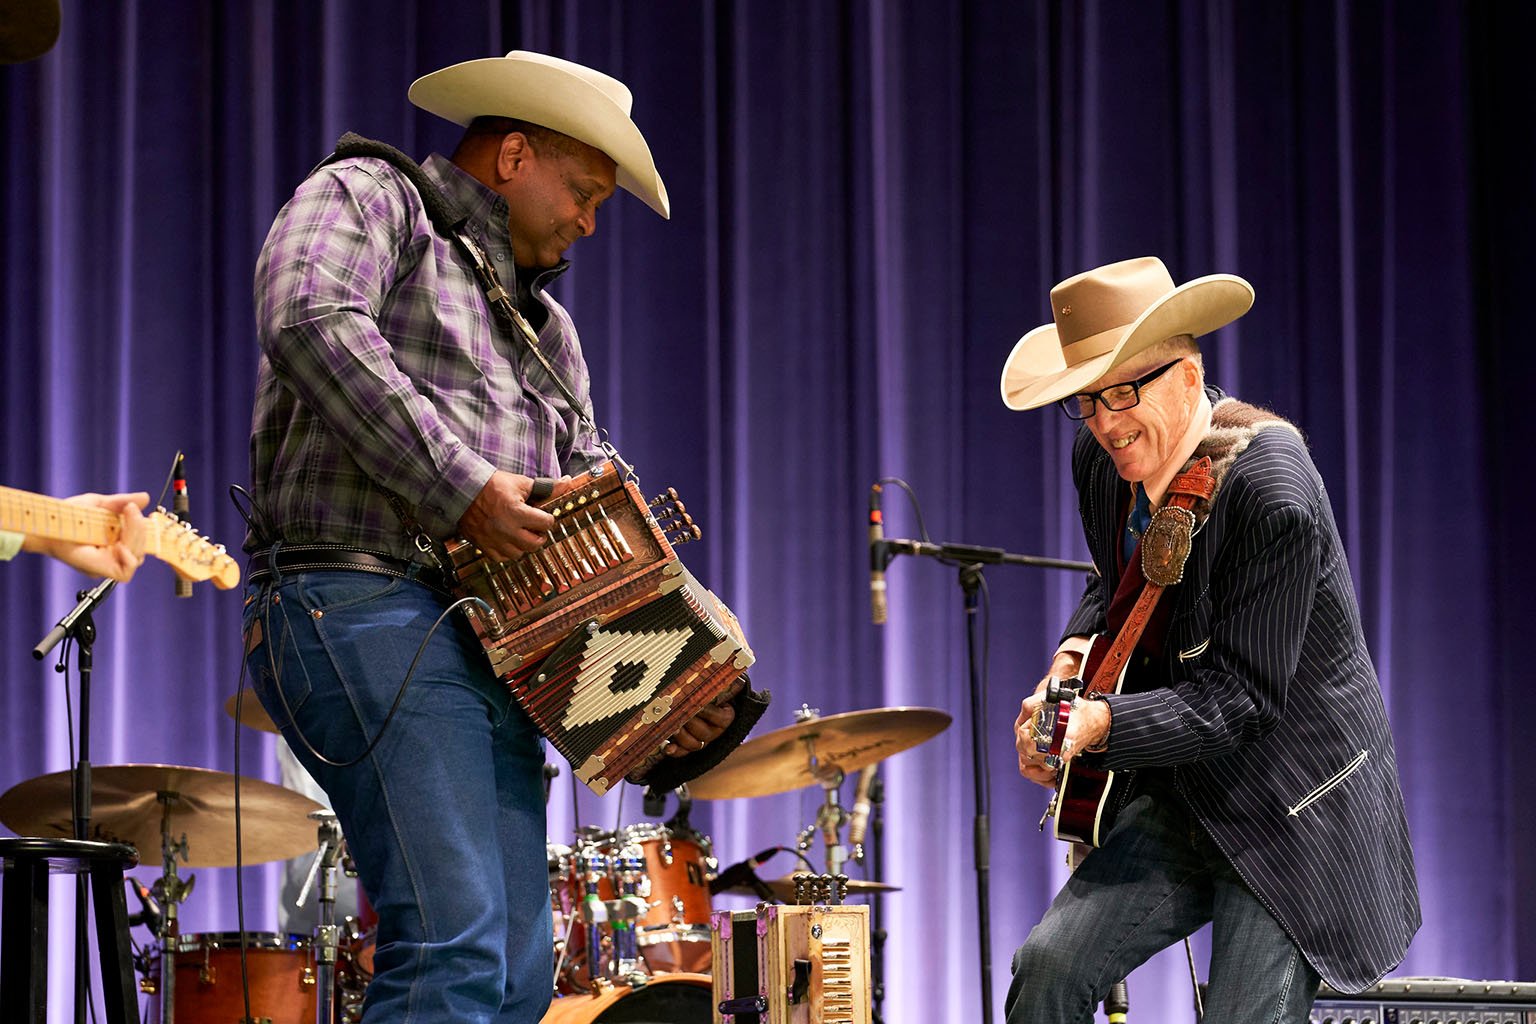 Geno Delafose and Wylie Gustafson trade musical ideas in performance. Photo by Marla Aufmuth